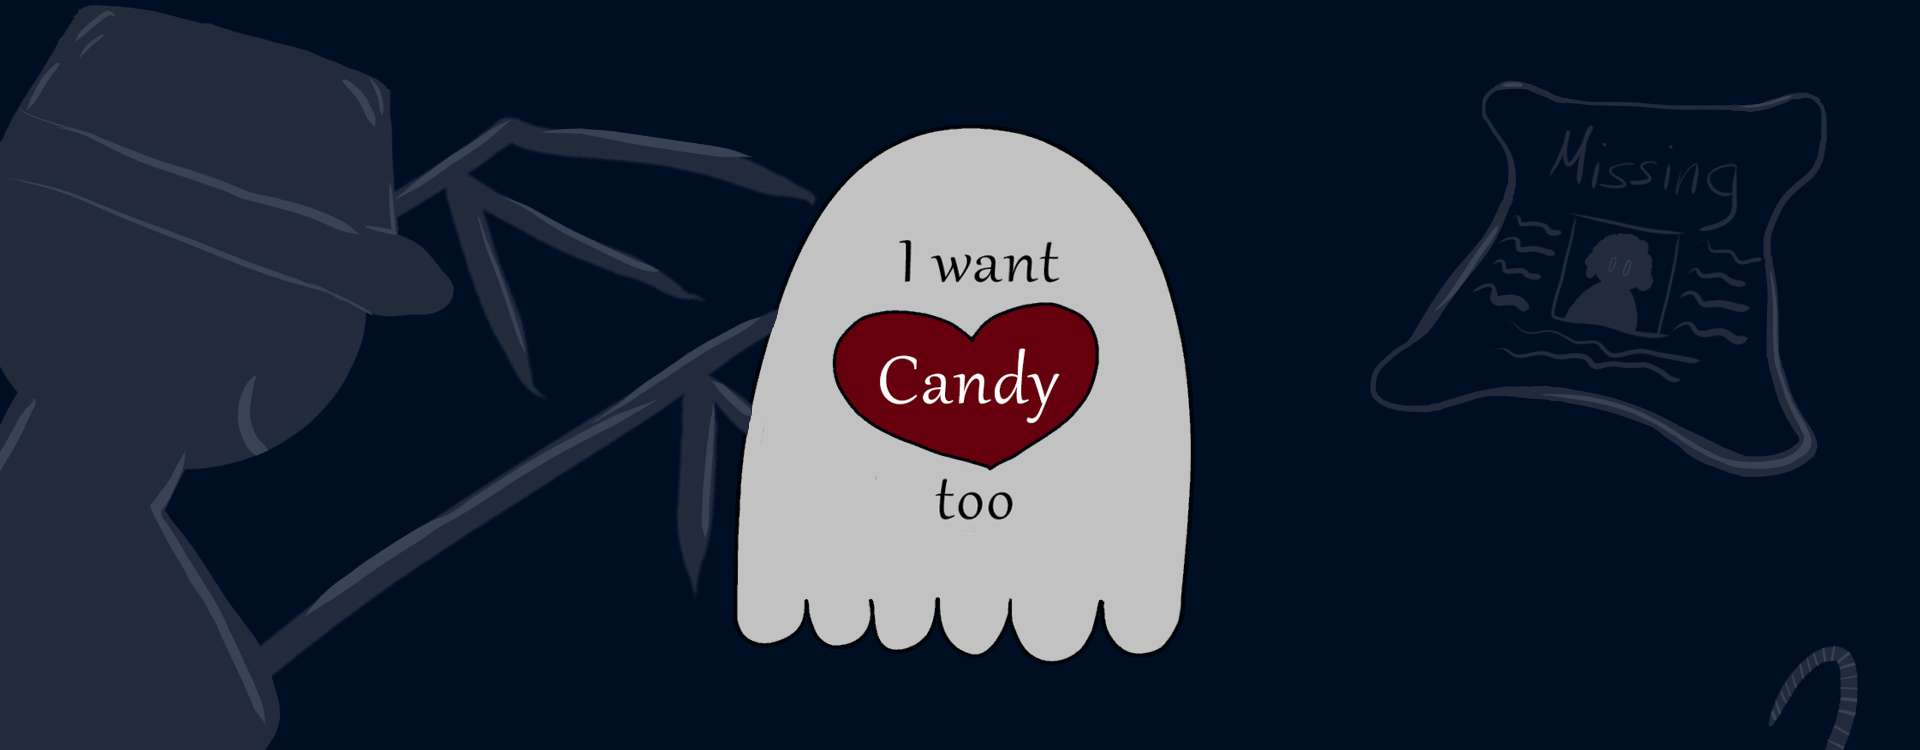 I want Candy too